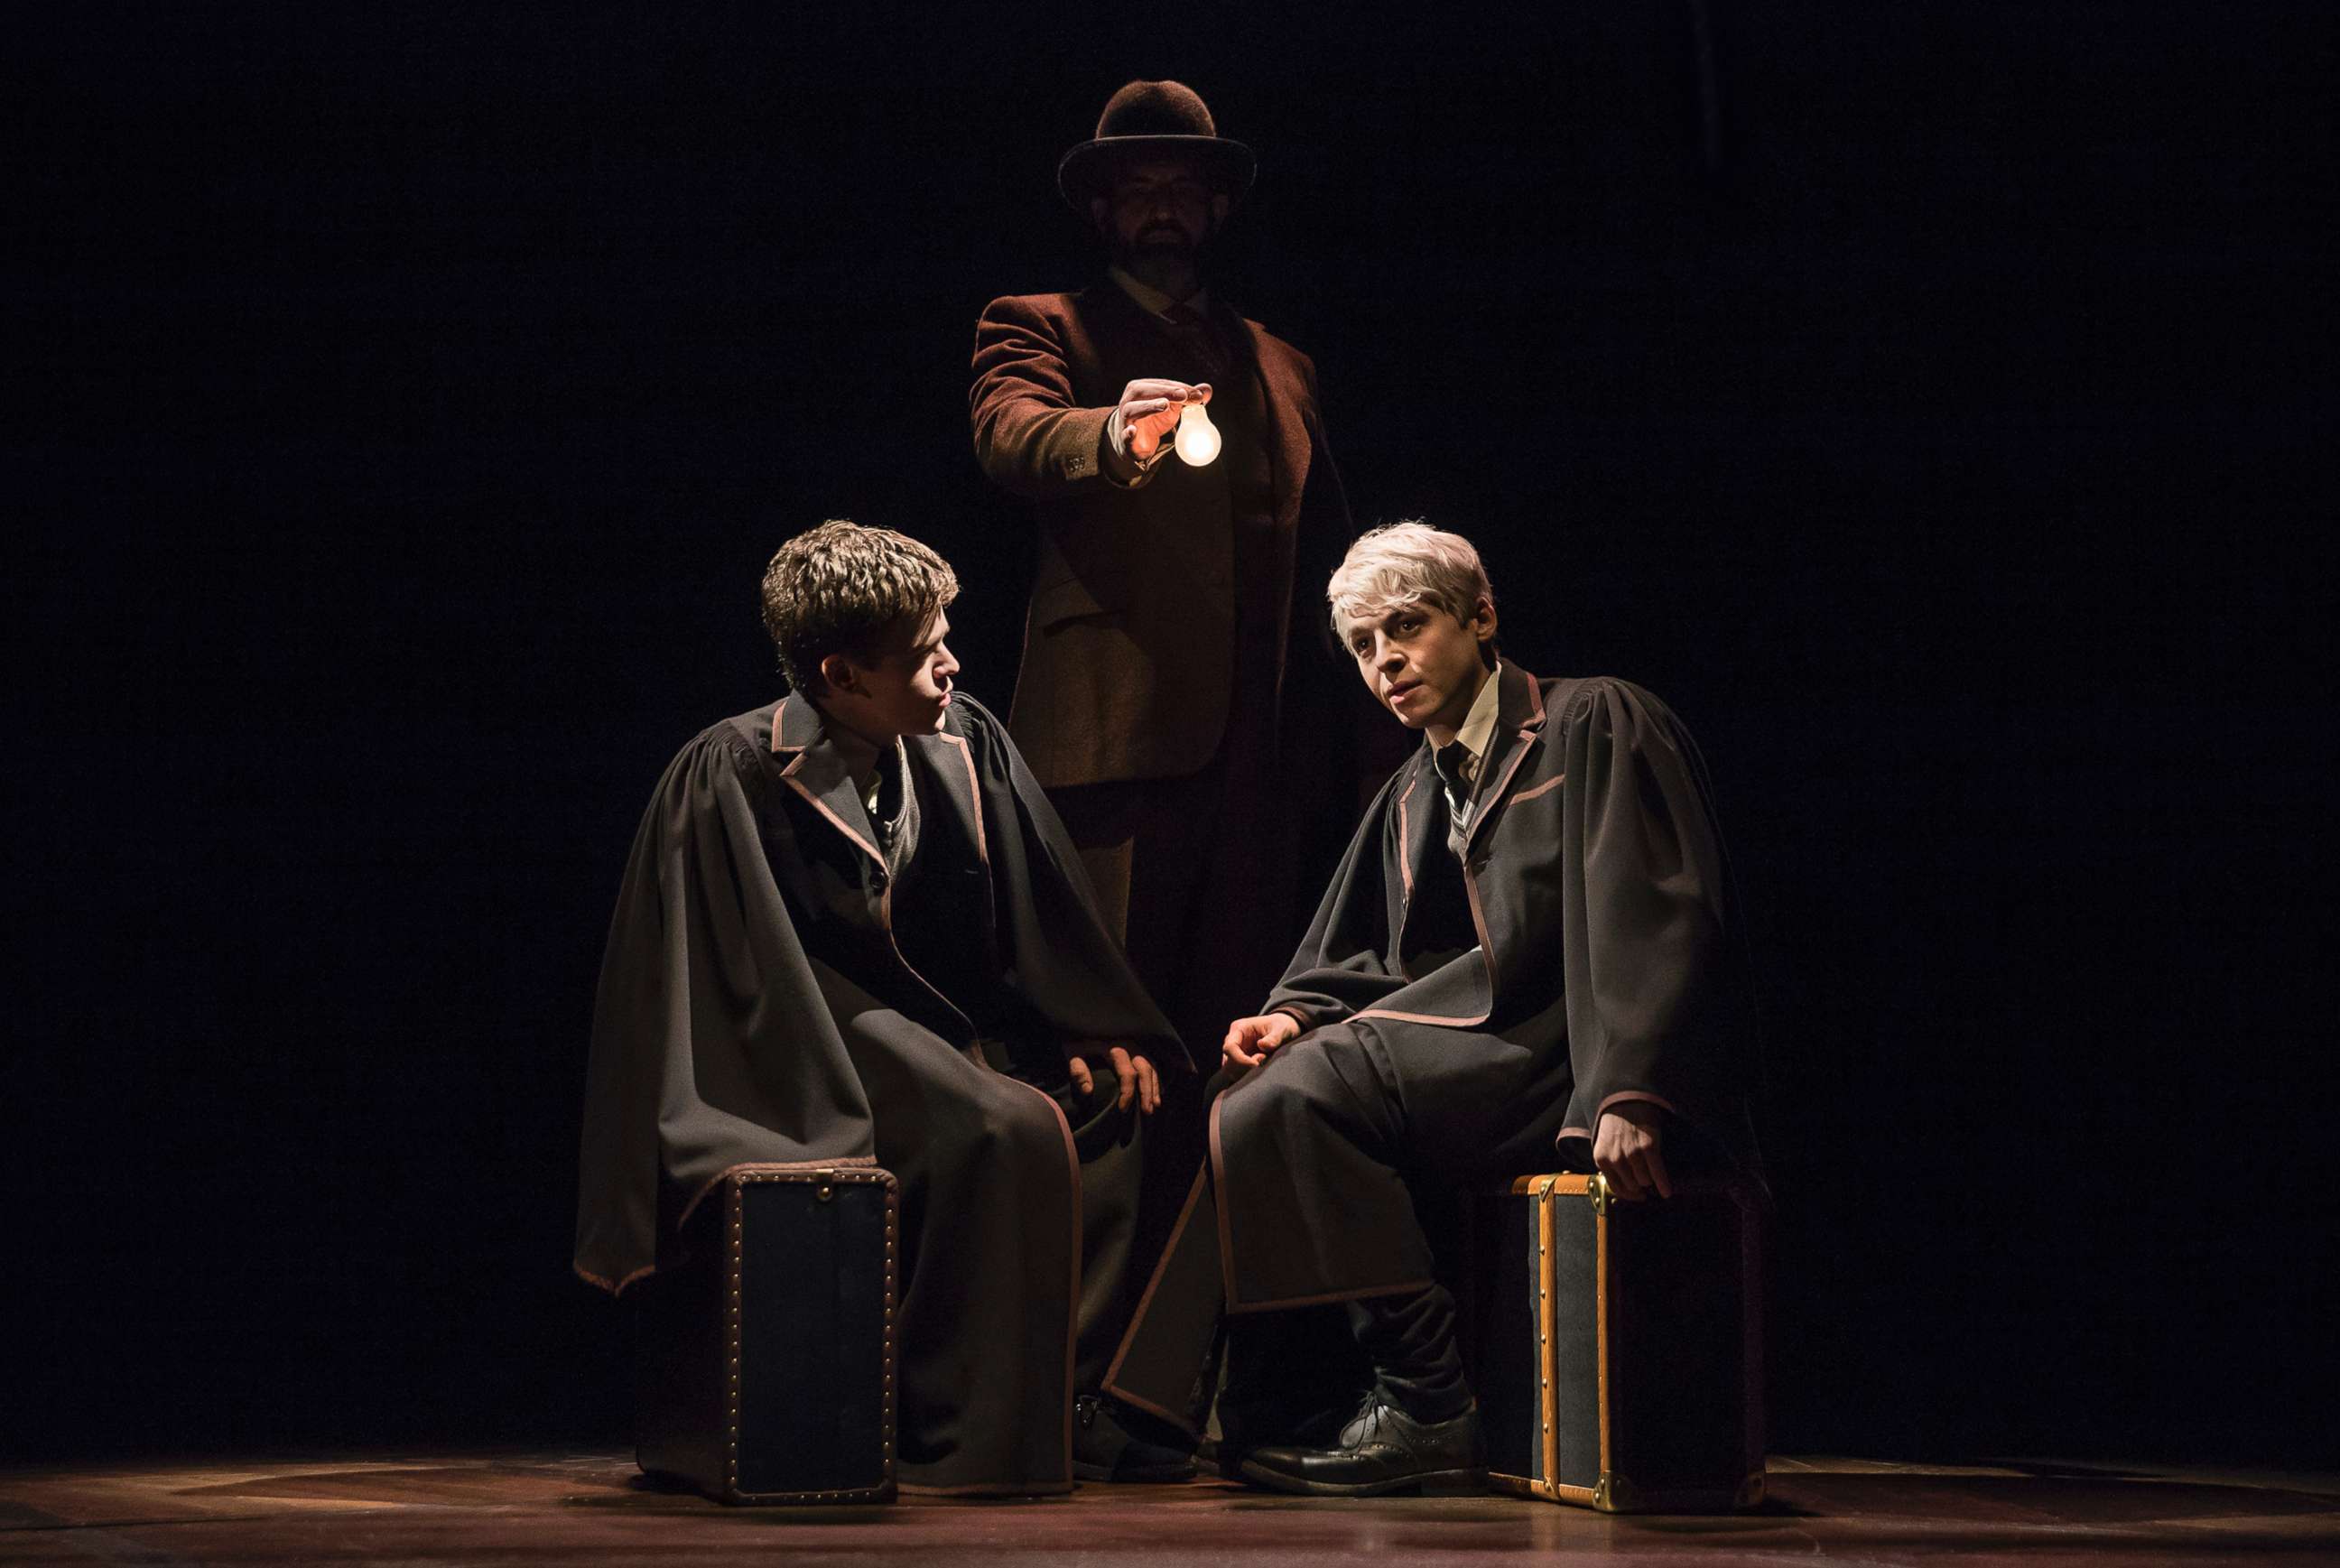 PHOTO: Sam Clemmett and Anthony Boyle in a scene from "Harry Potter and the Cursed Child."